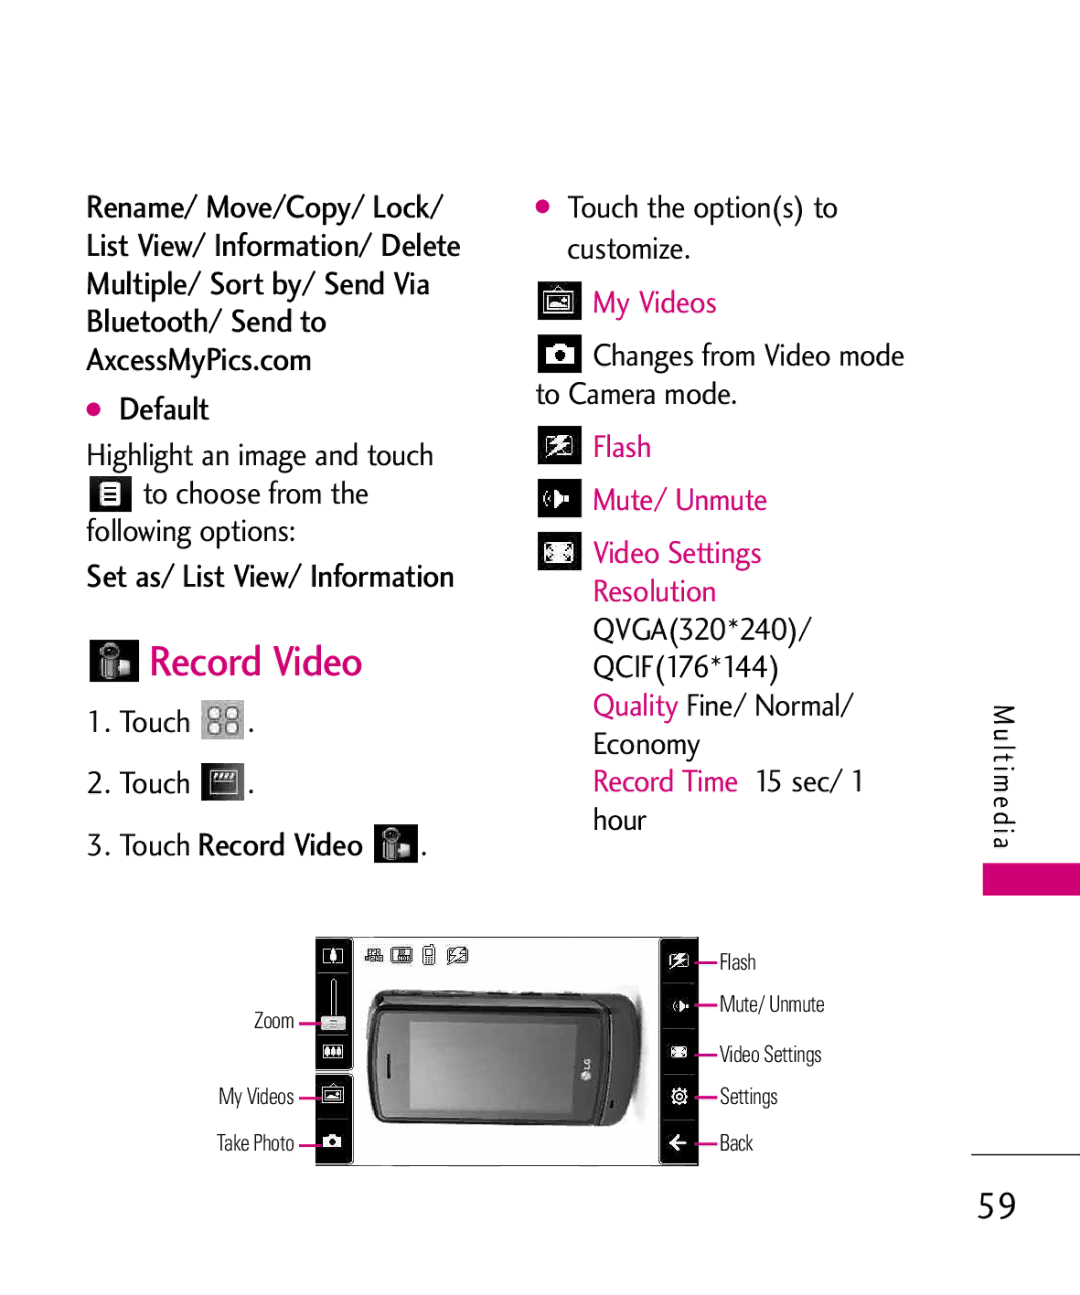 LG Electronics Glimmer manual Default, Touch Record Video, Changes from Video mode to Camera mode 